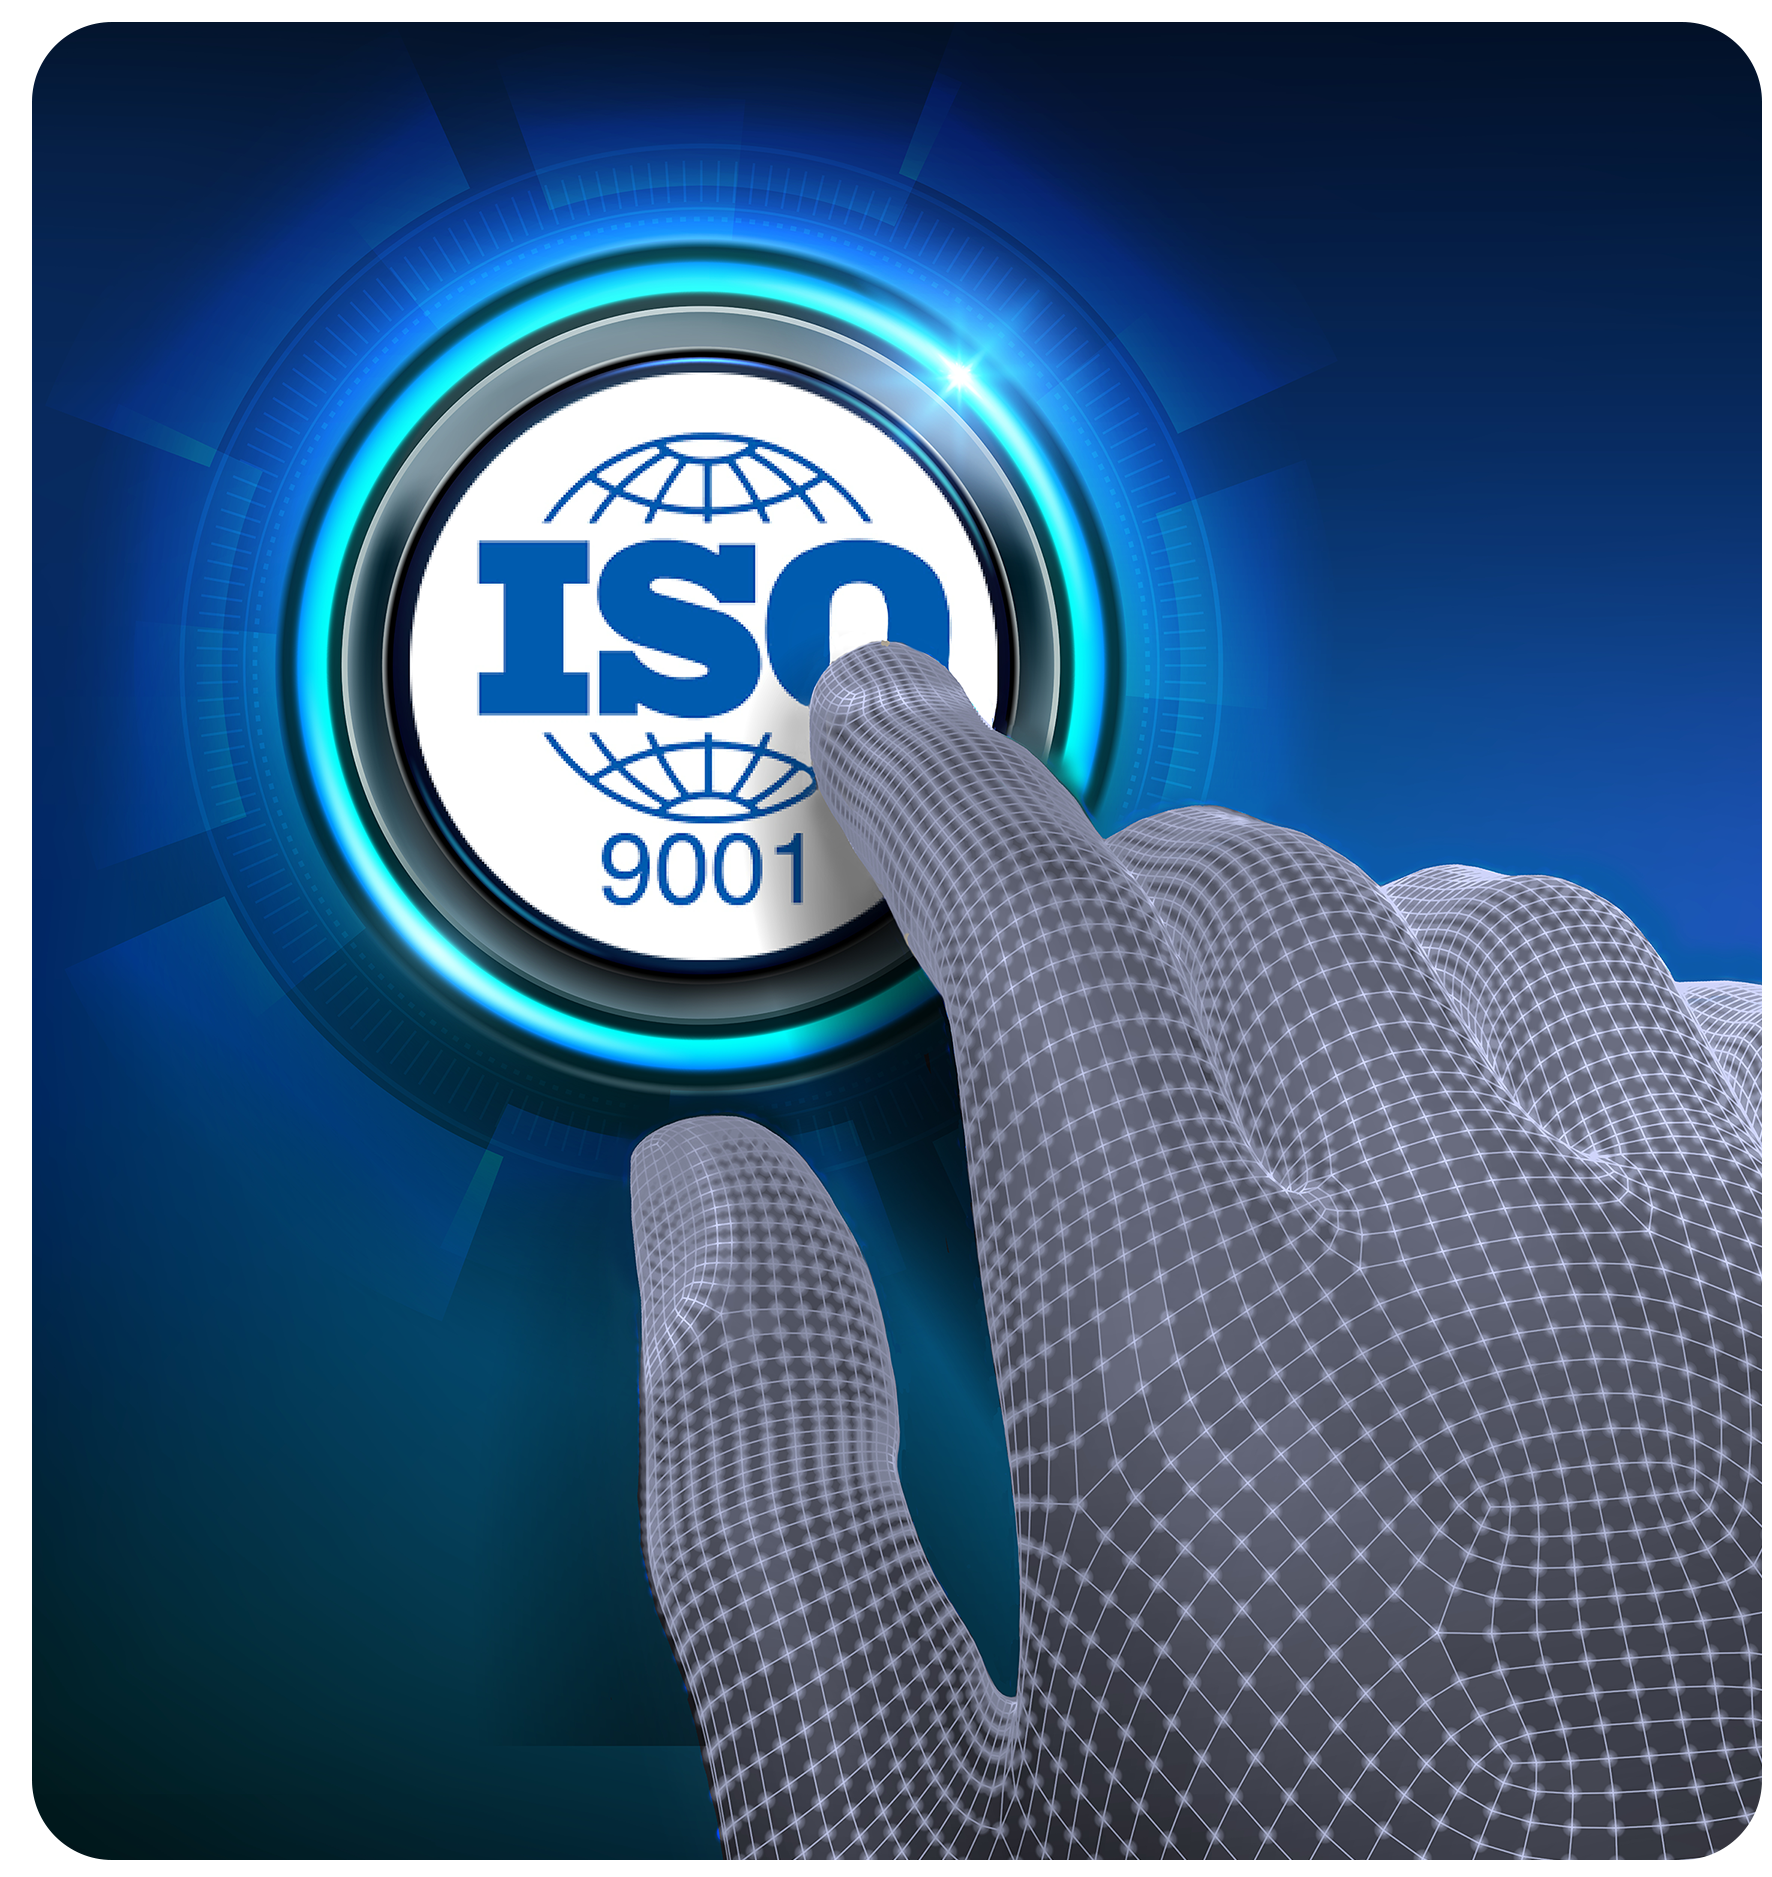 Certification ISO 9001 - Abstract Image